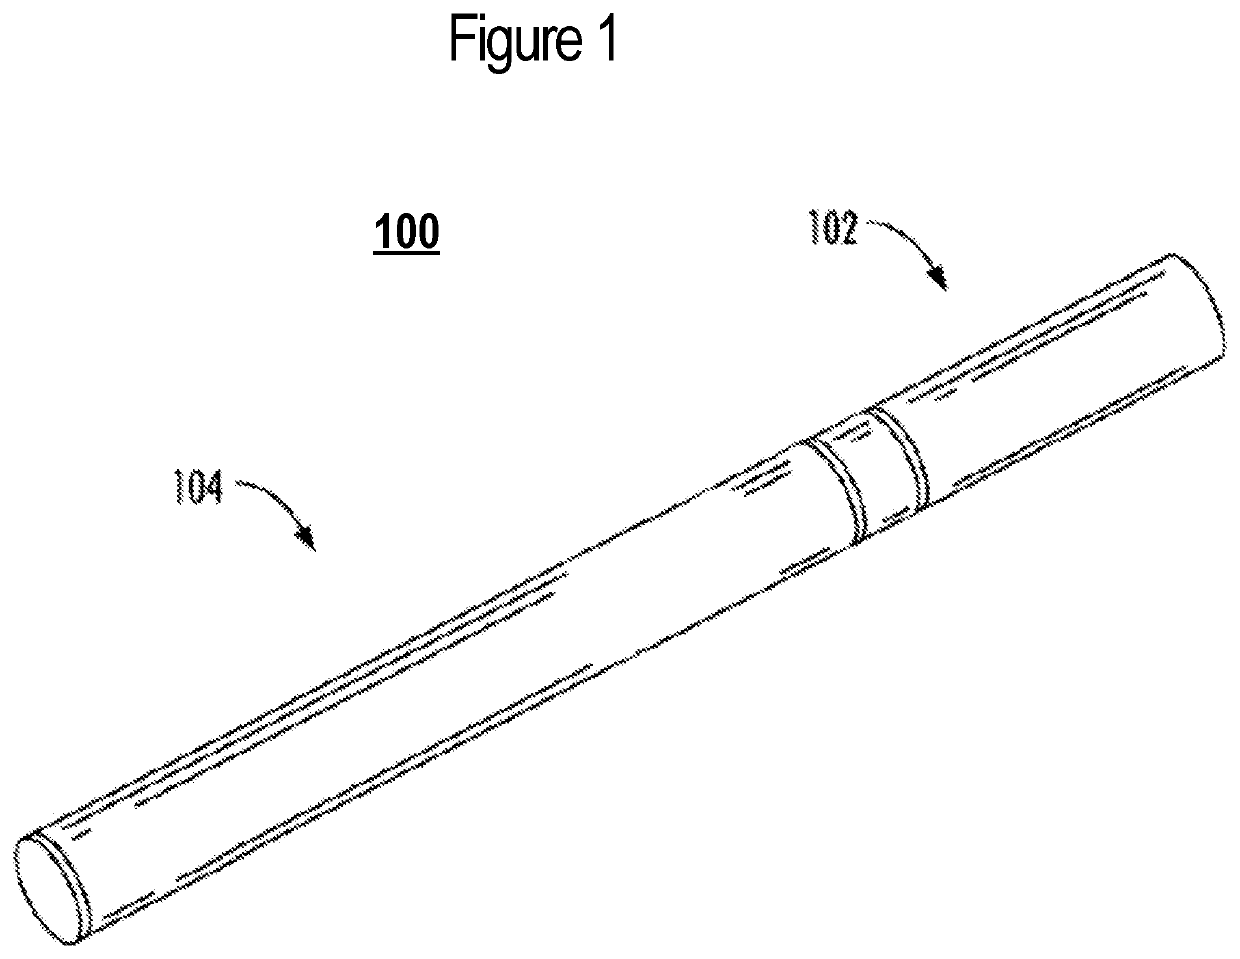 Authentication and age verification for an aerosol delivery device